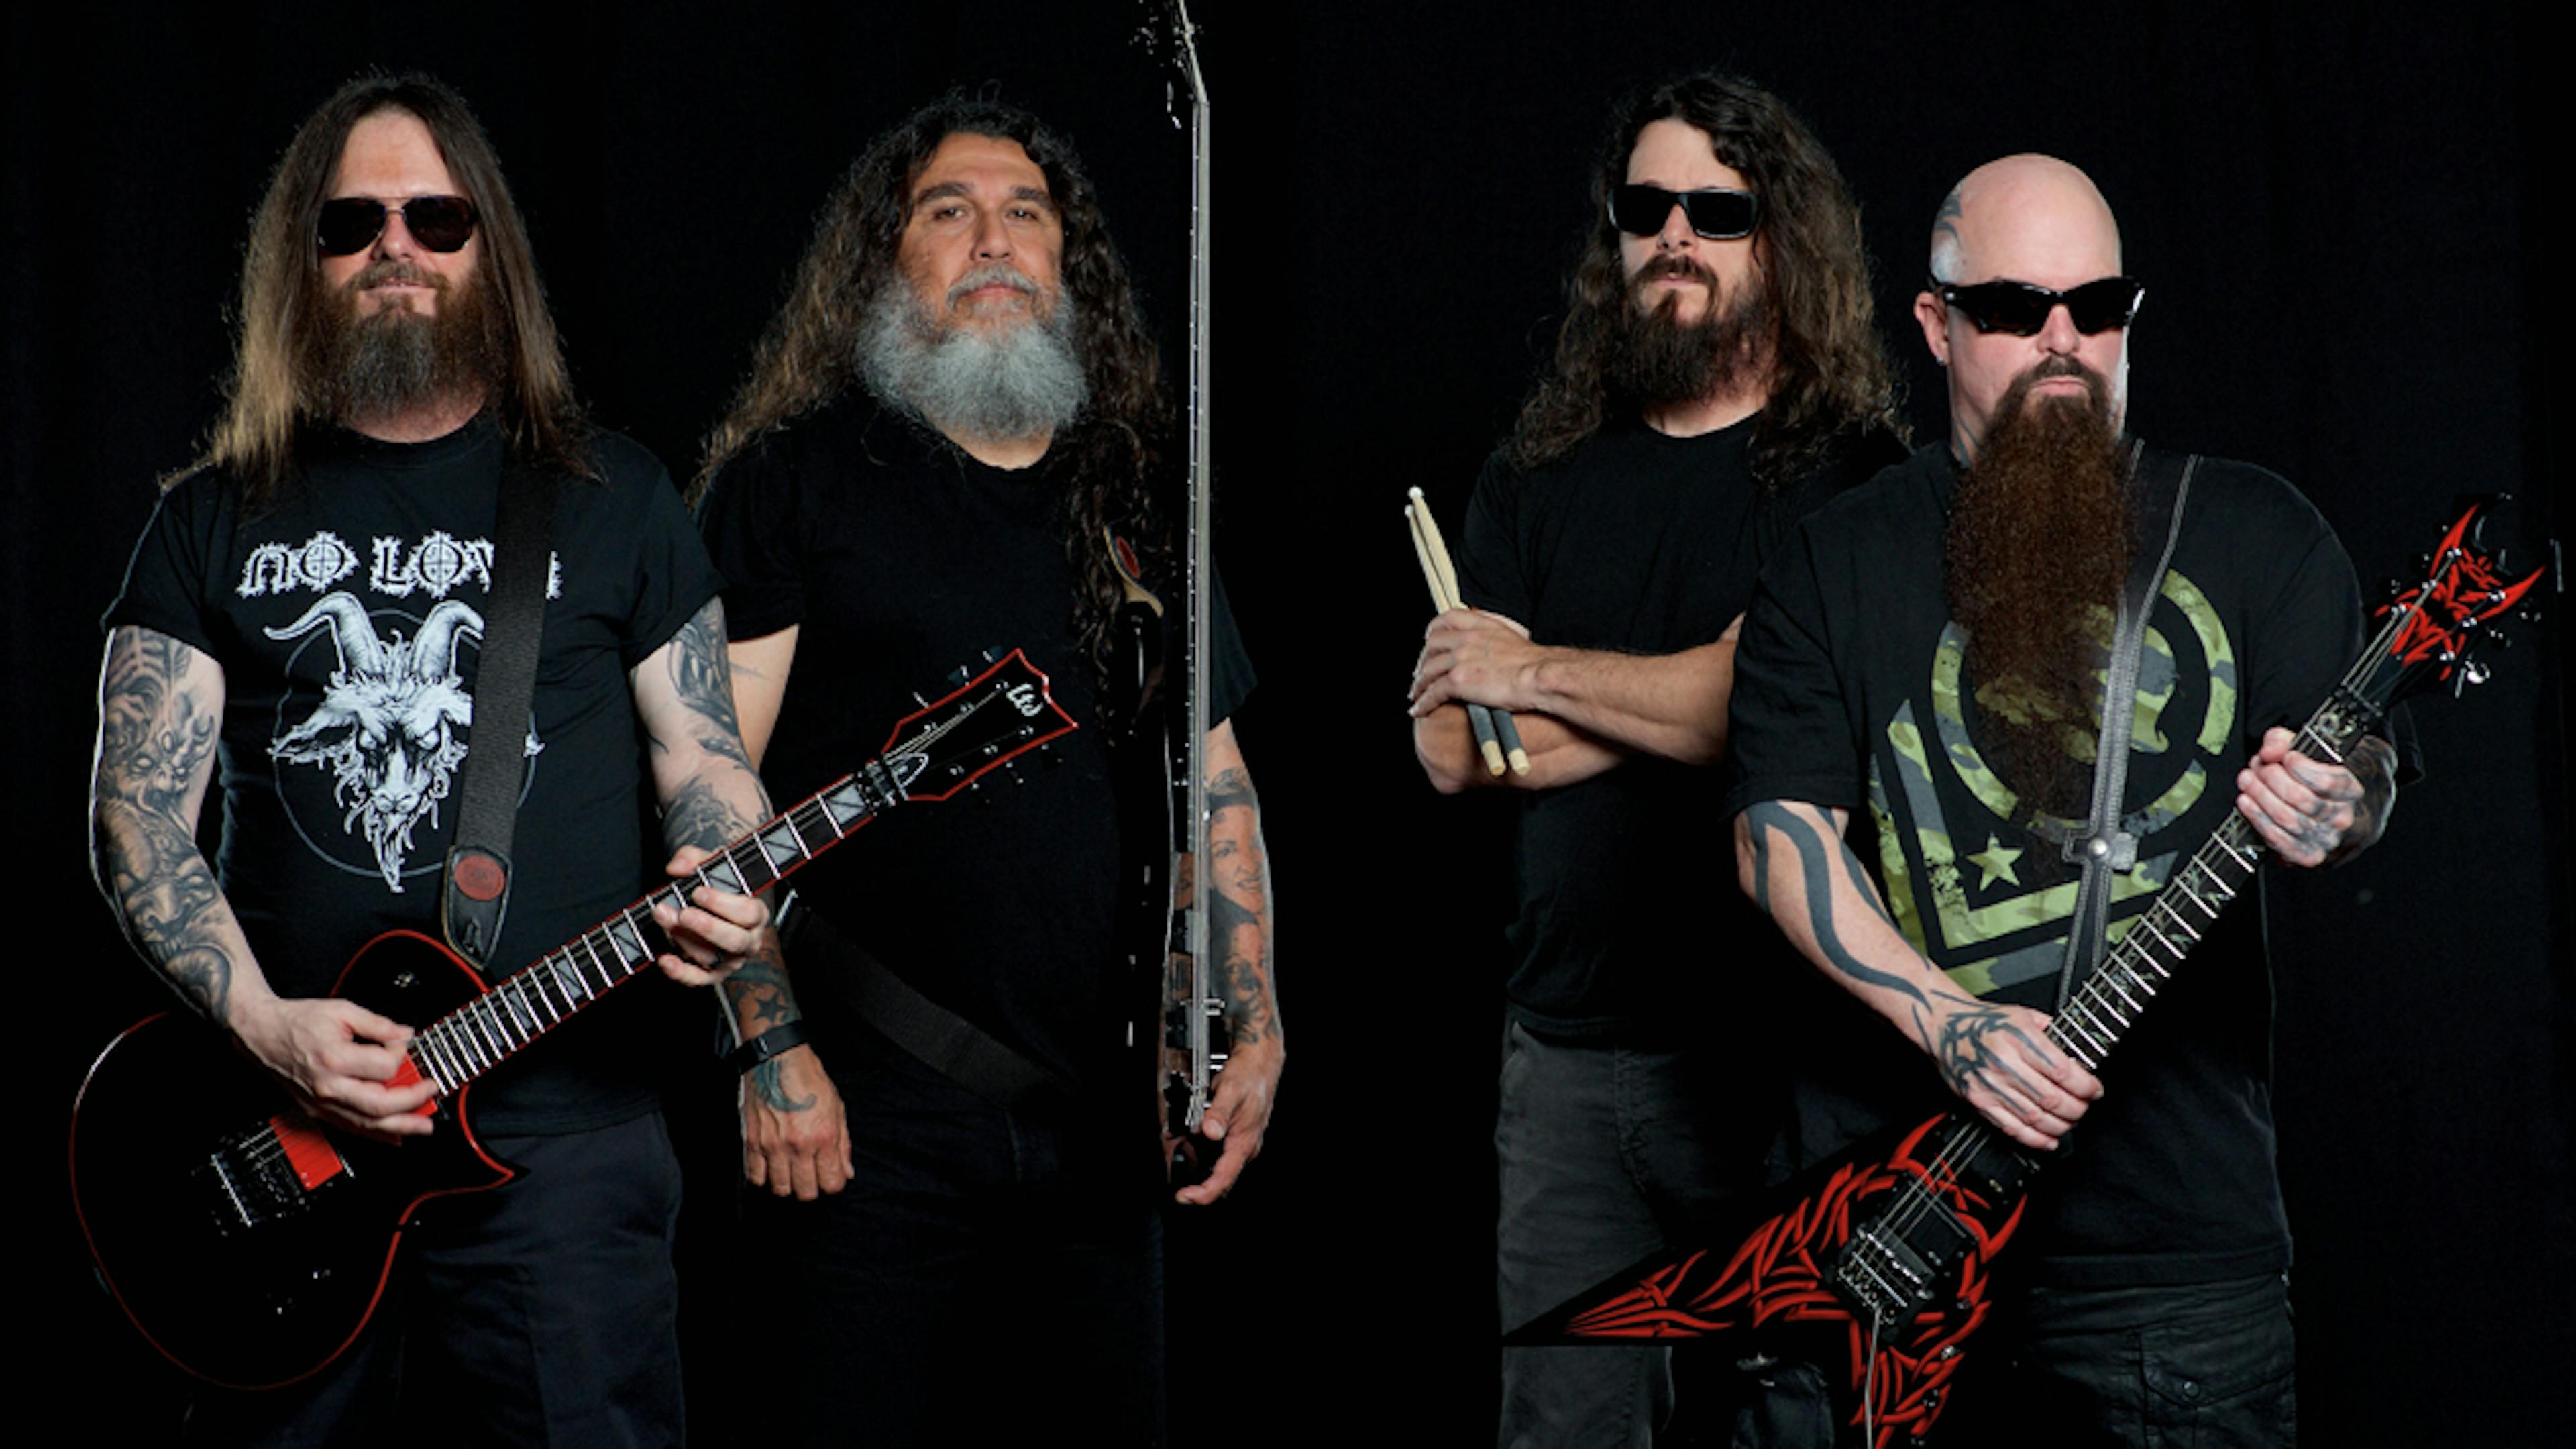 Slayer, Disturbed, Marilyn Manson, Rob Zombie, And More To Play The First-Ever Chaos AB Festival